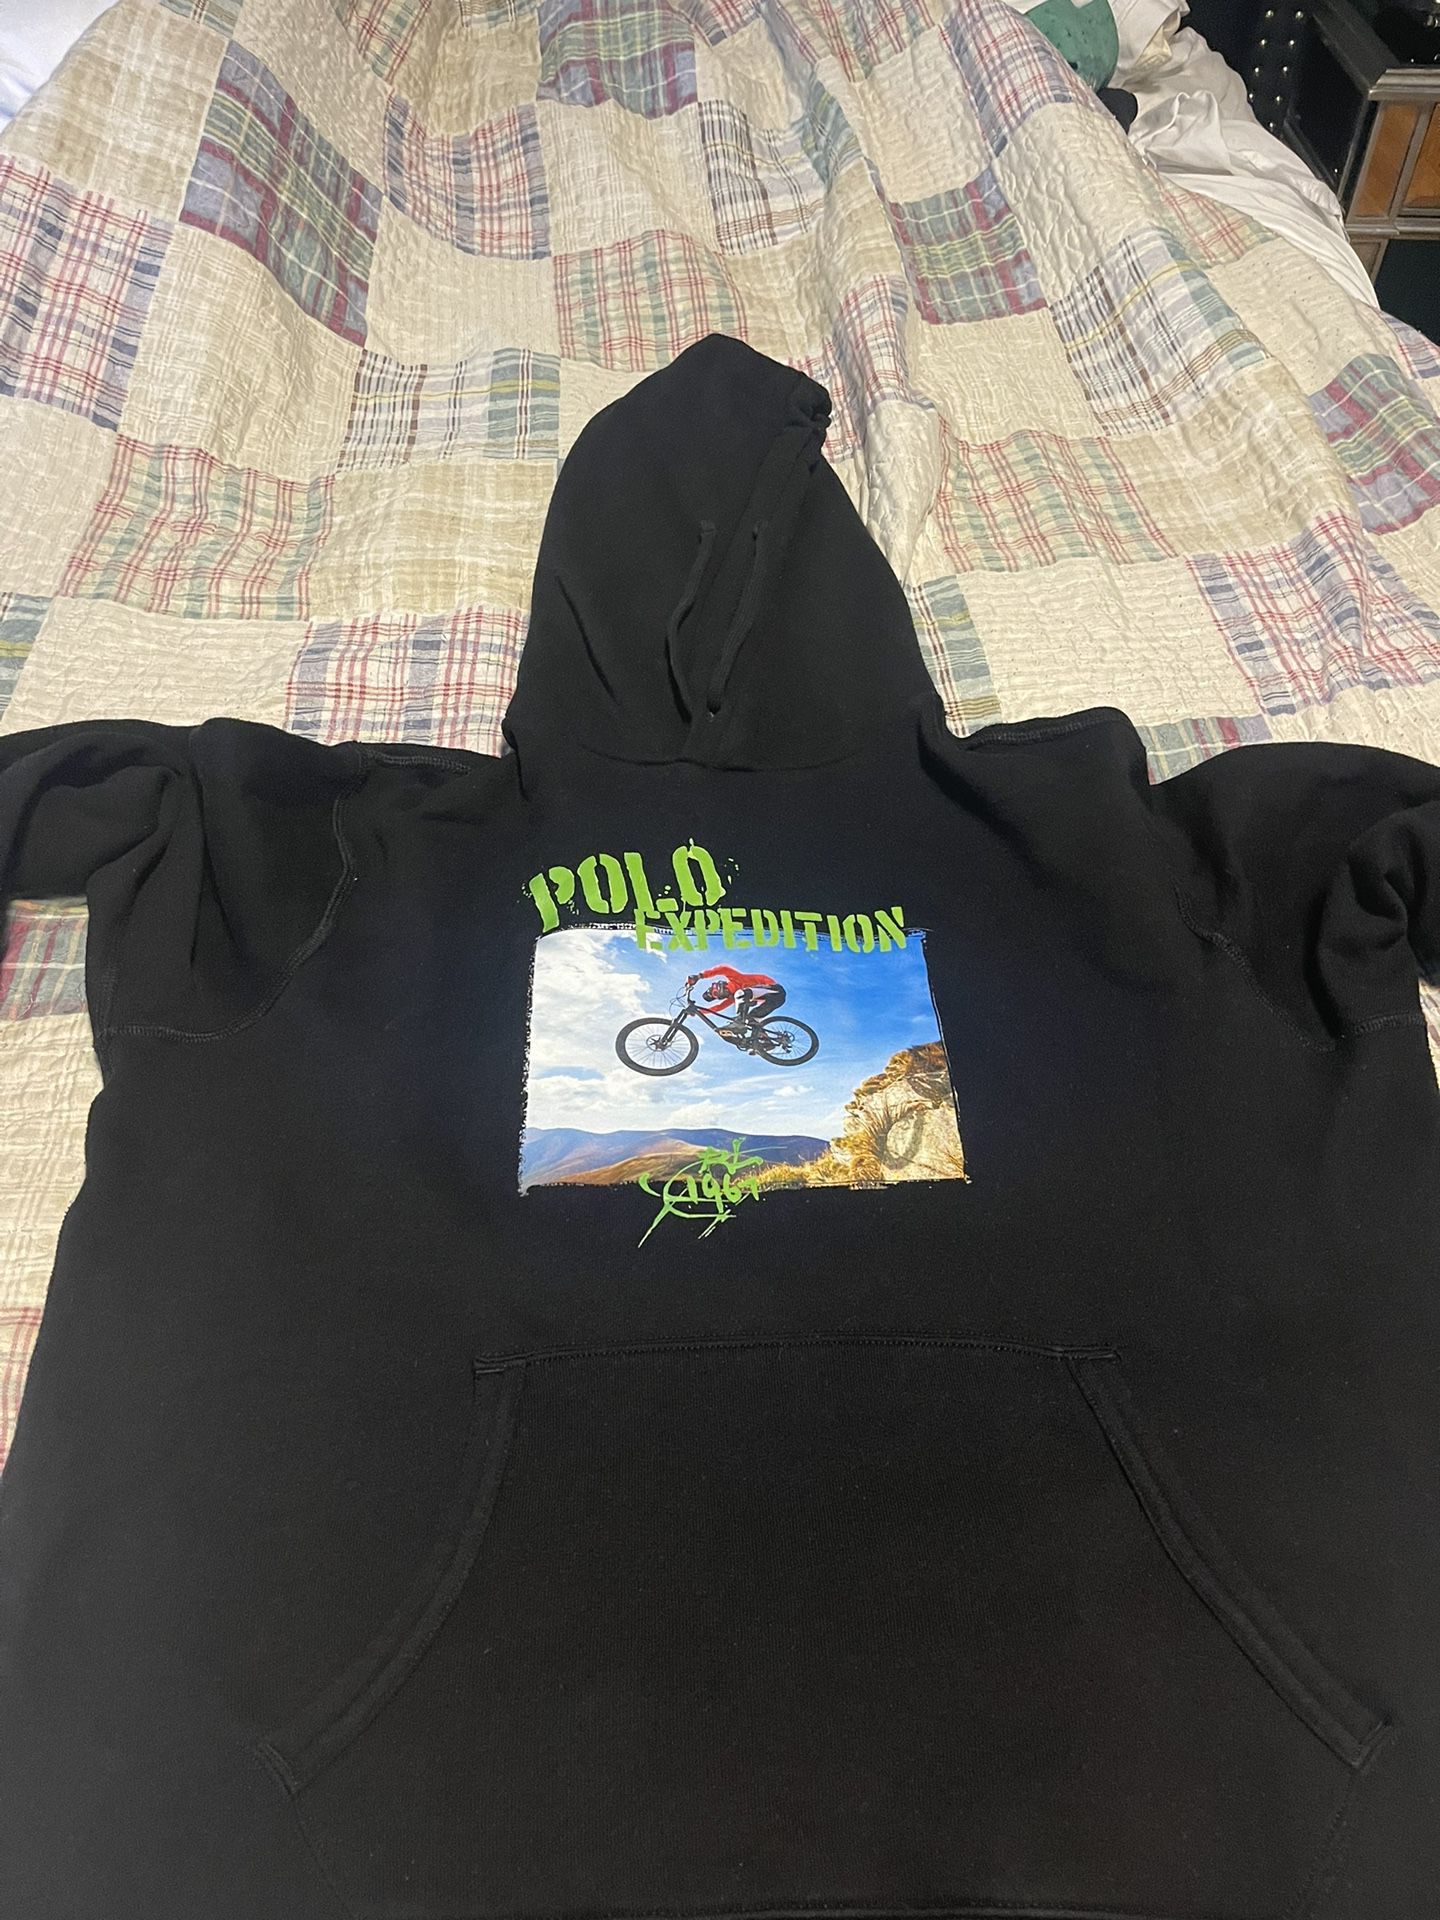 🔥🔥🔥POLO EXPEDITION HOODY SWEATER 